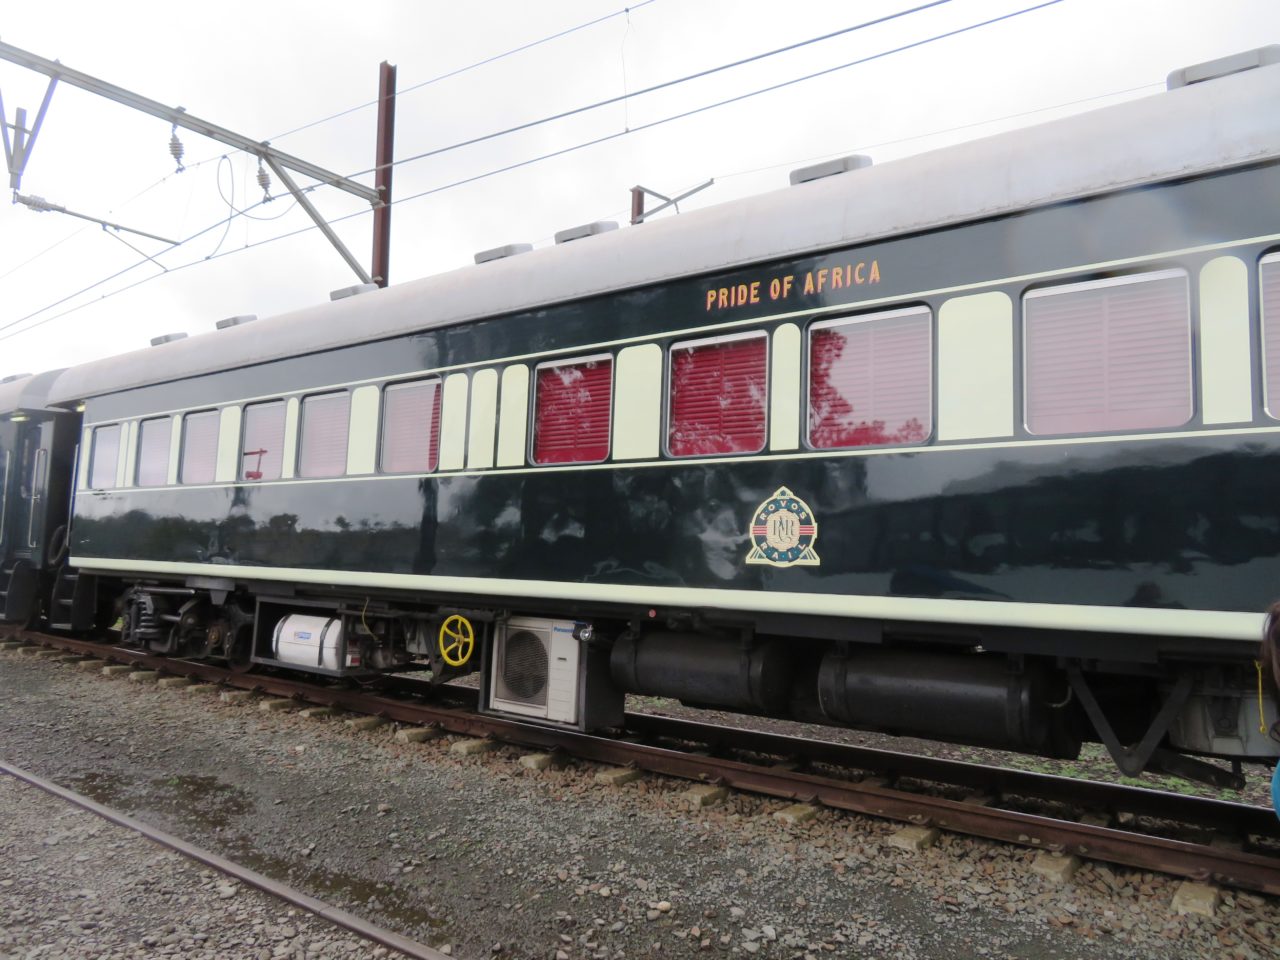 The <strong>Rovos <em>Rail</em></strong> <em>Pride of Africa</em> train is hailed as the most luxurious train in the world!